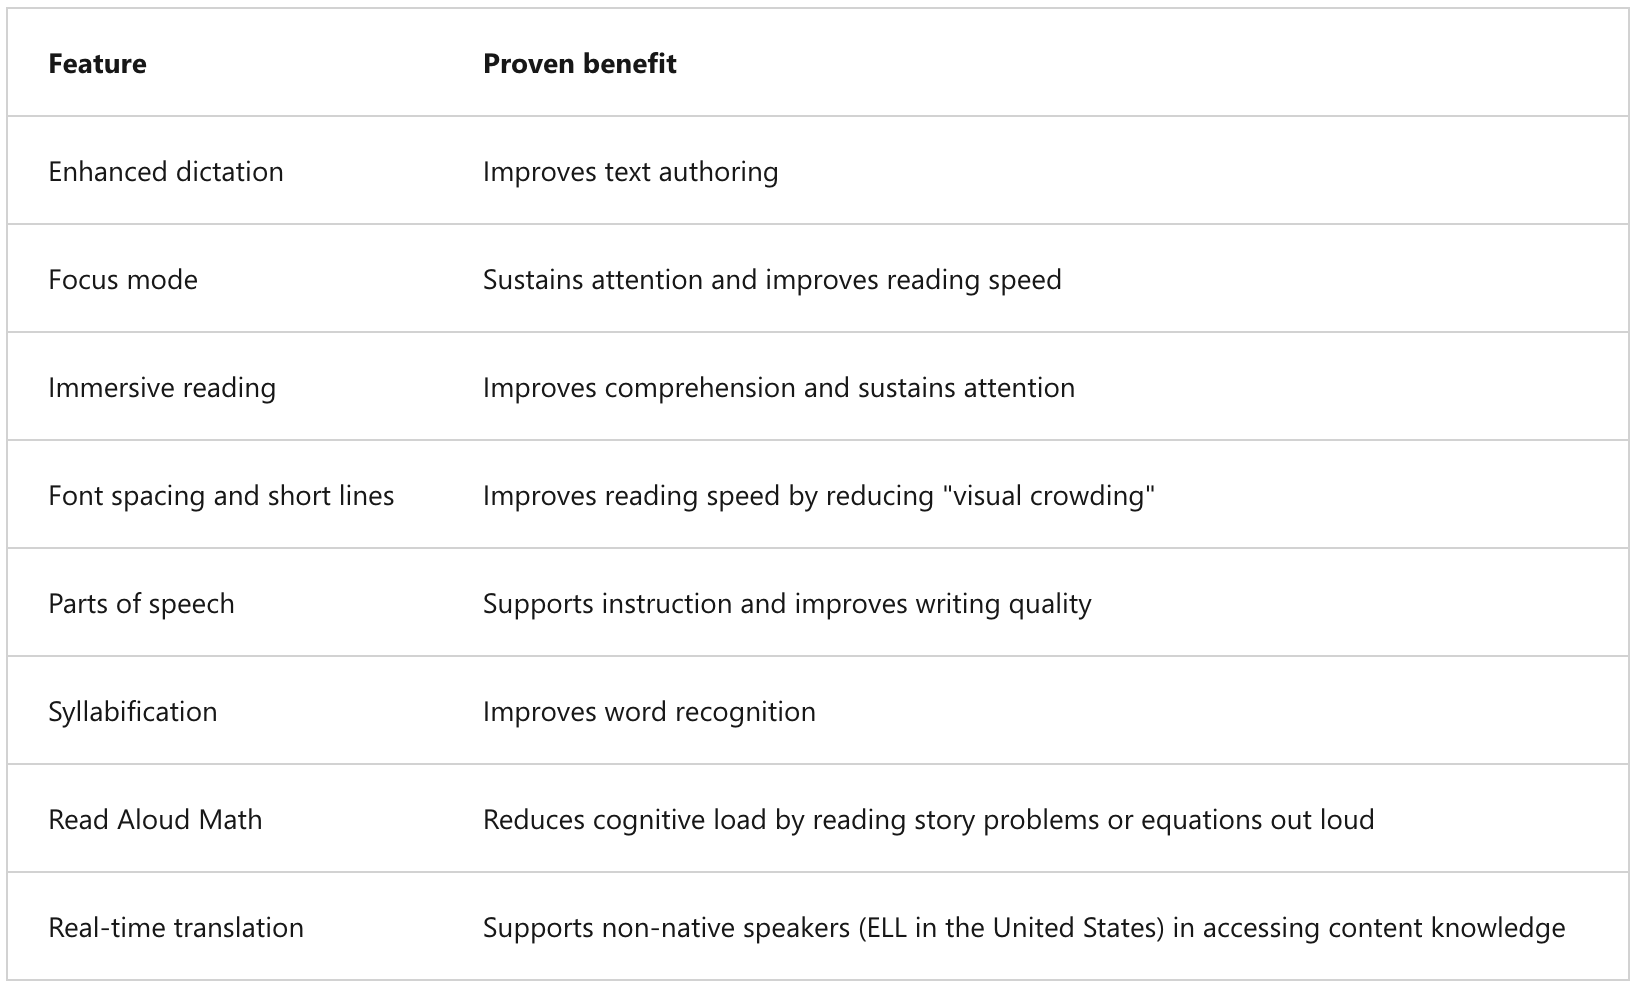 Features and associated proven benefits of Immersive Reader.